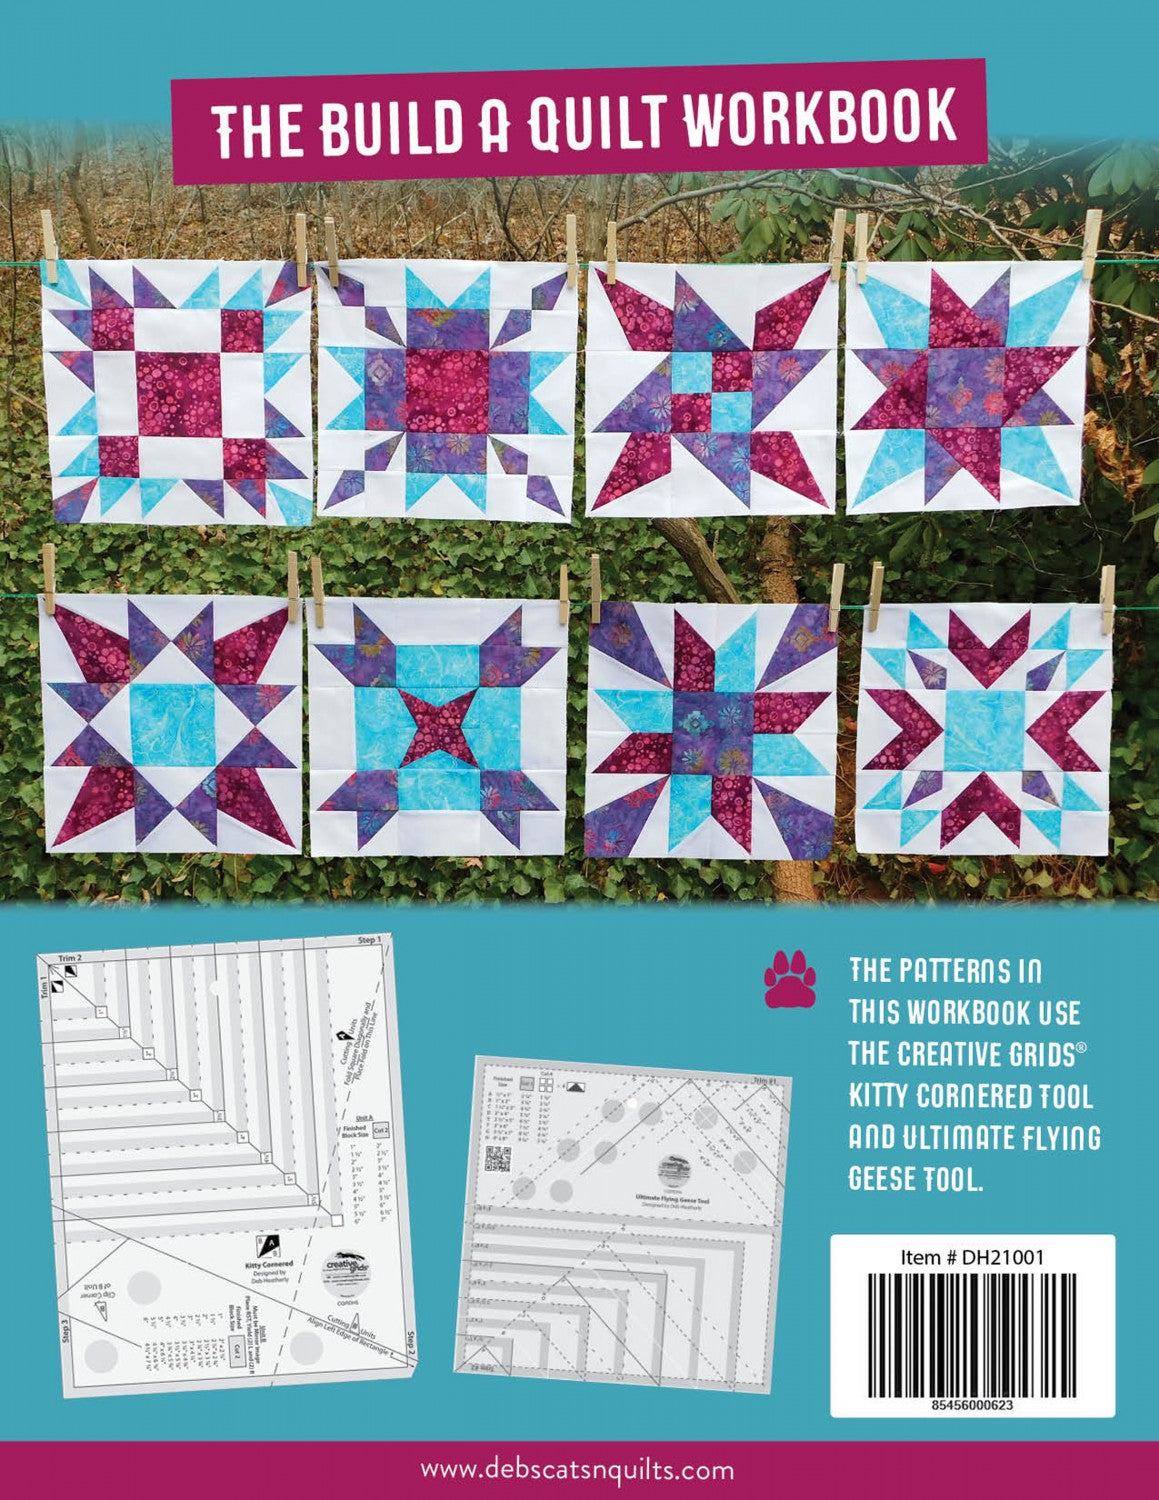 The Build a Quilt Workbook by Deb Heatherly of Deb's Cats N Quilts